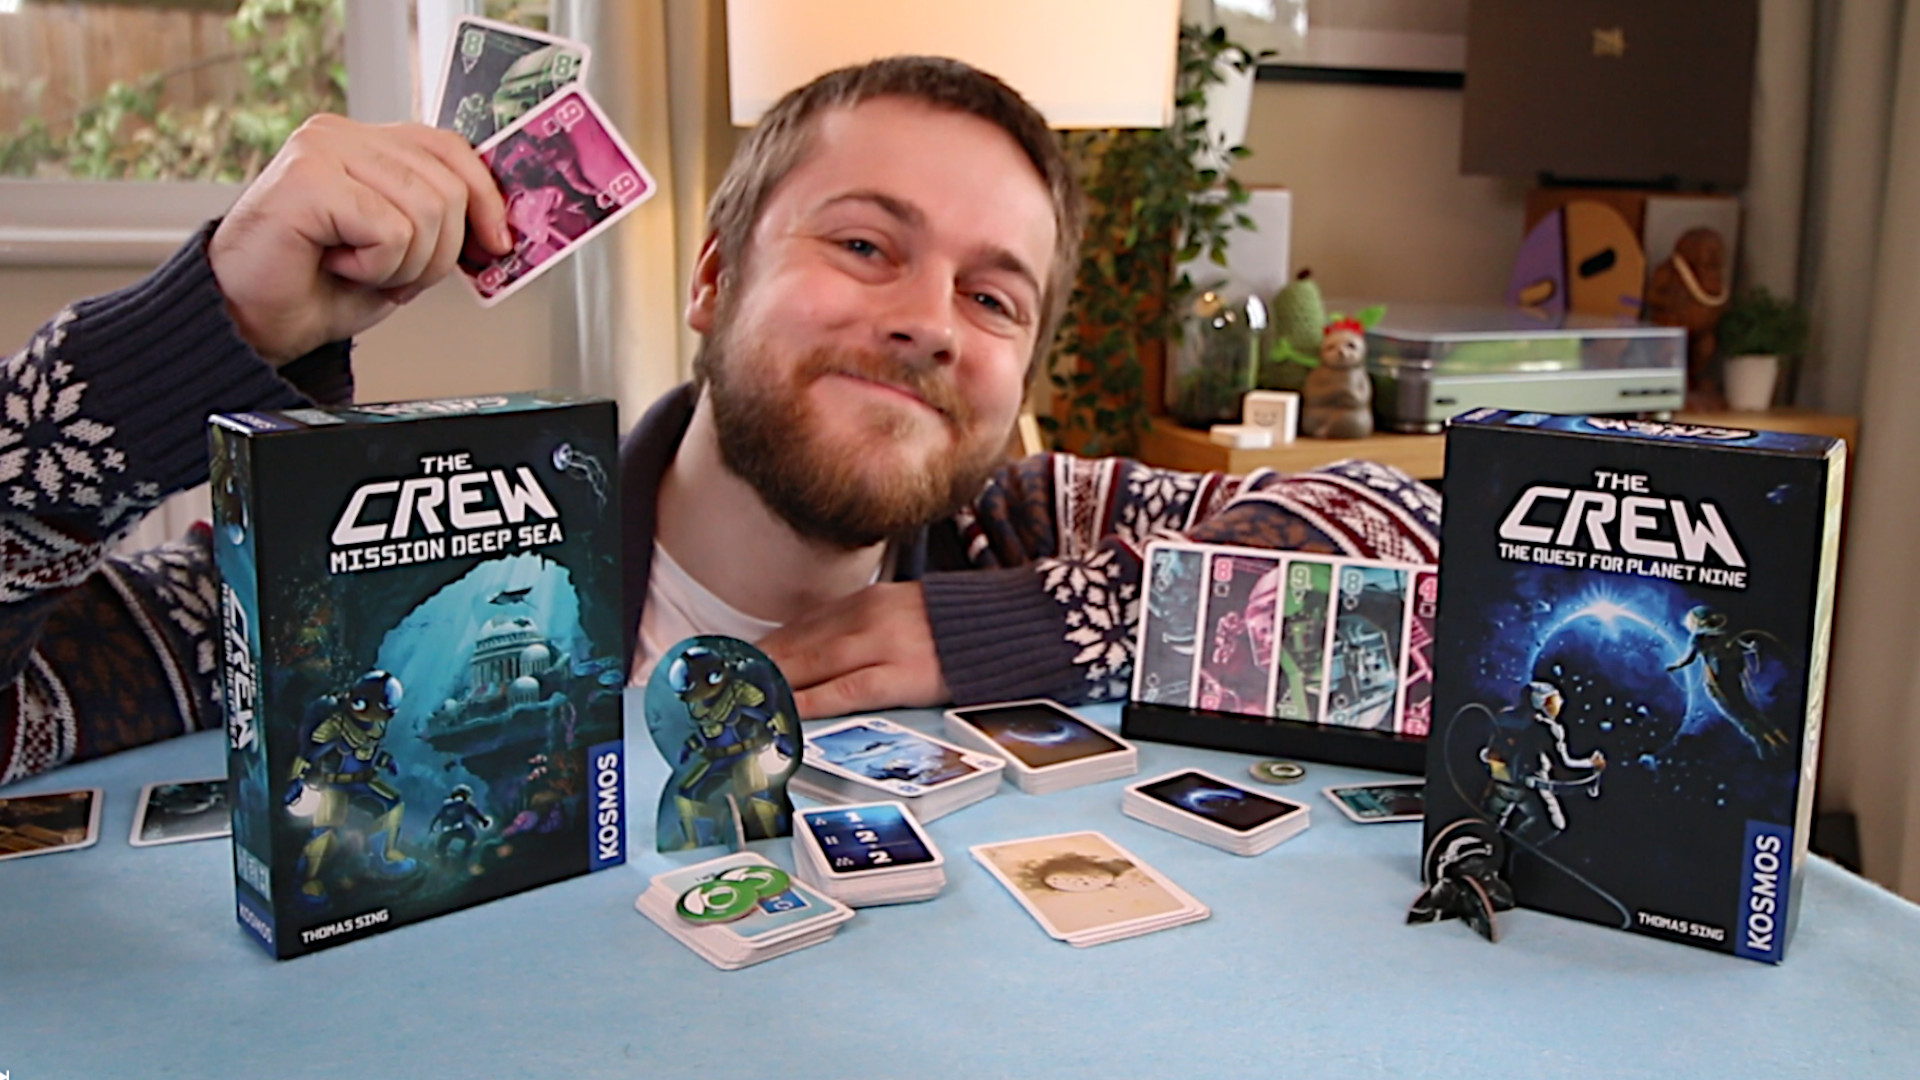 The Crew: The Quest for Planet Nine - The Tabletop Family